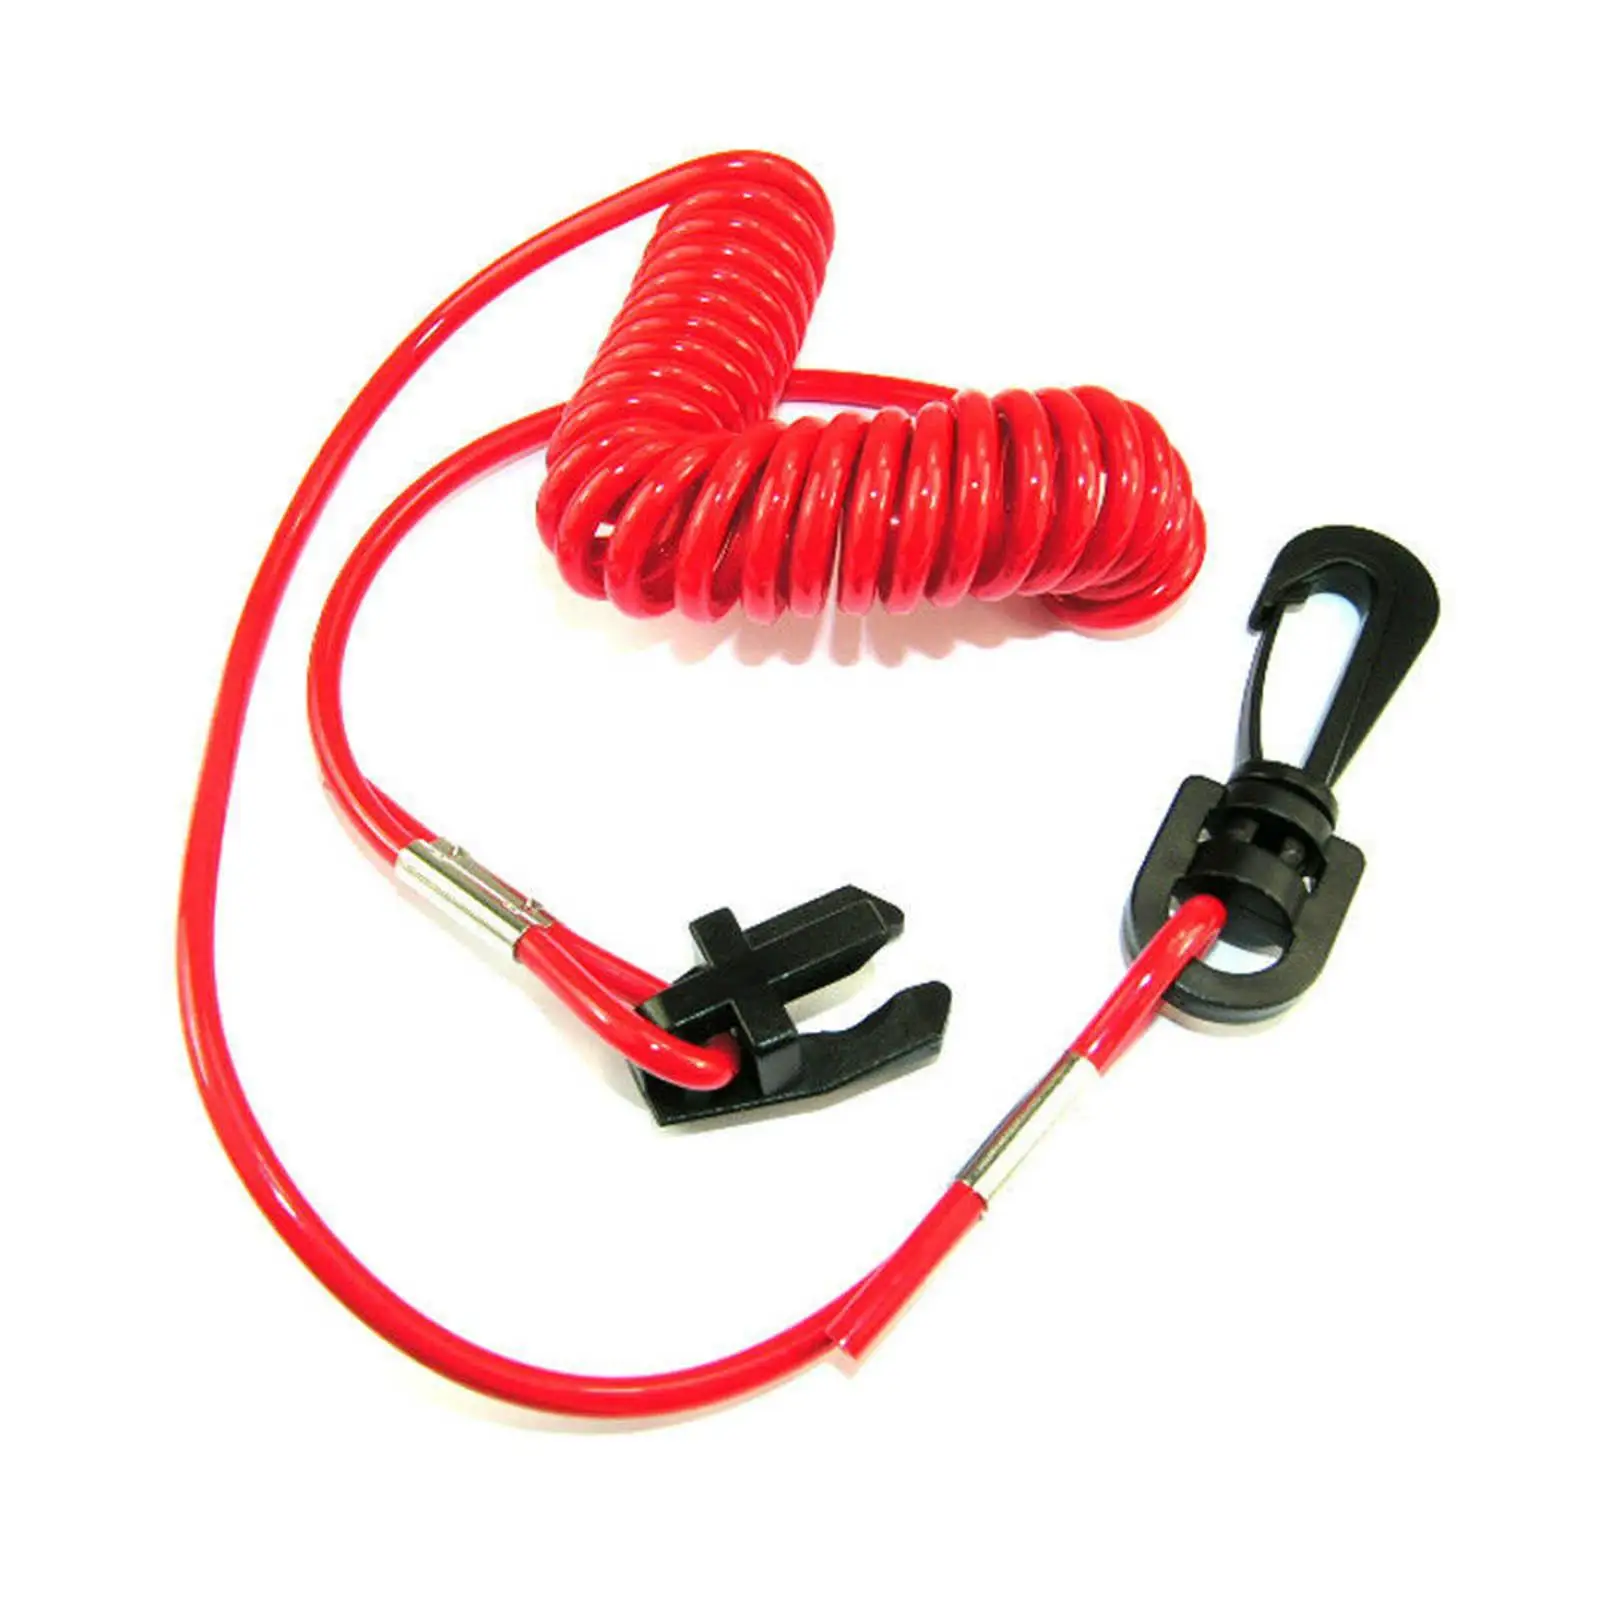 Boat Safety Kill Stop Switch Lanyard, Safety Tether Cord Red Fit for for Evinrude for Omc for Johnson Stop Switch Lanyard Boat